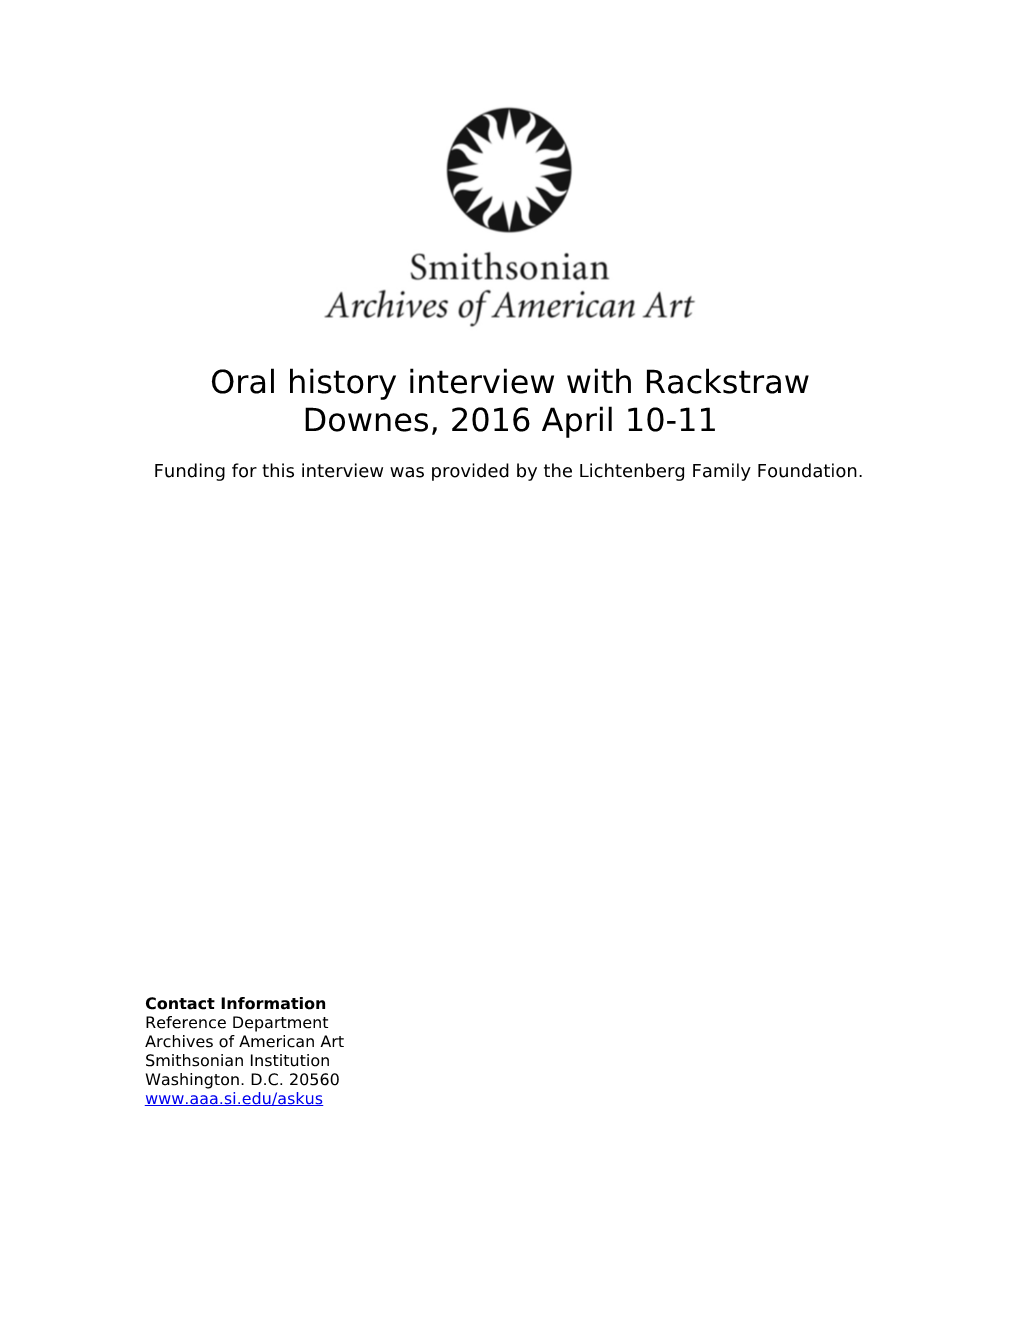 Oral History Interview with Rackstraw Downes, 2016 April 10-11